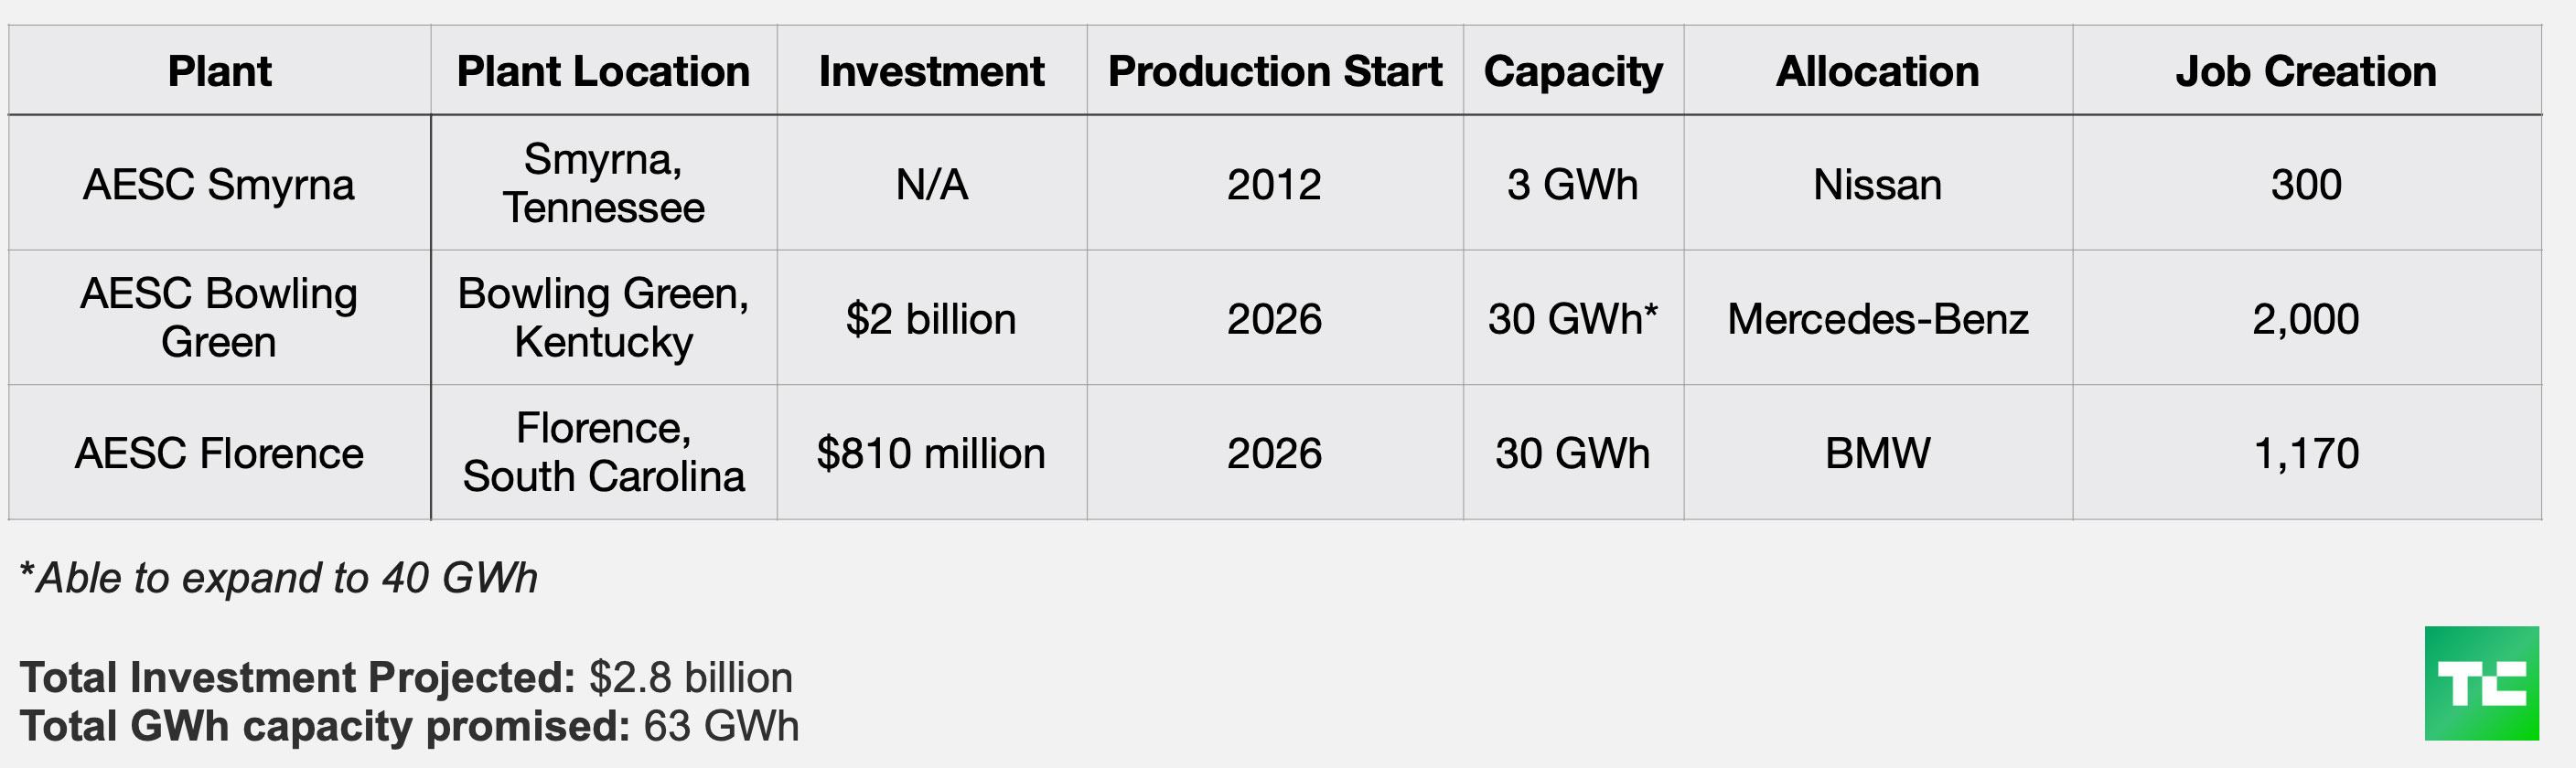 AESC's battery plant production plans broken down by plant name, plant location, investment, production start, capacity, allocation and the number of jobs it will create. AESC's total investment projected to be $2.8 billion. Total GWh capacity promised is 63 GWh. 